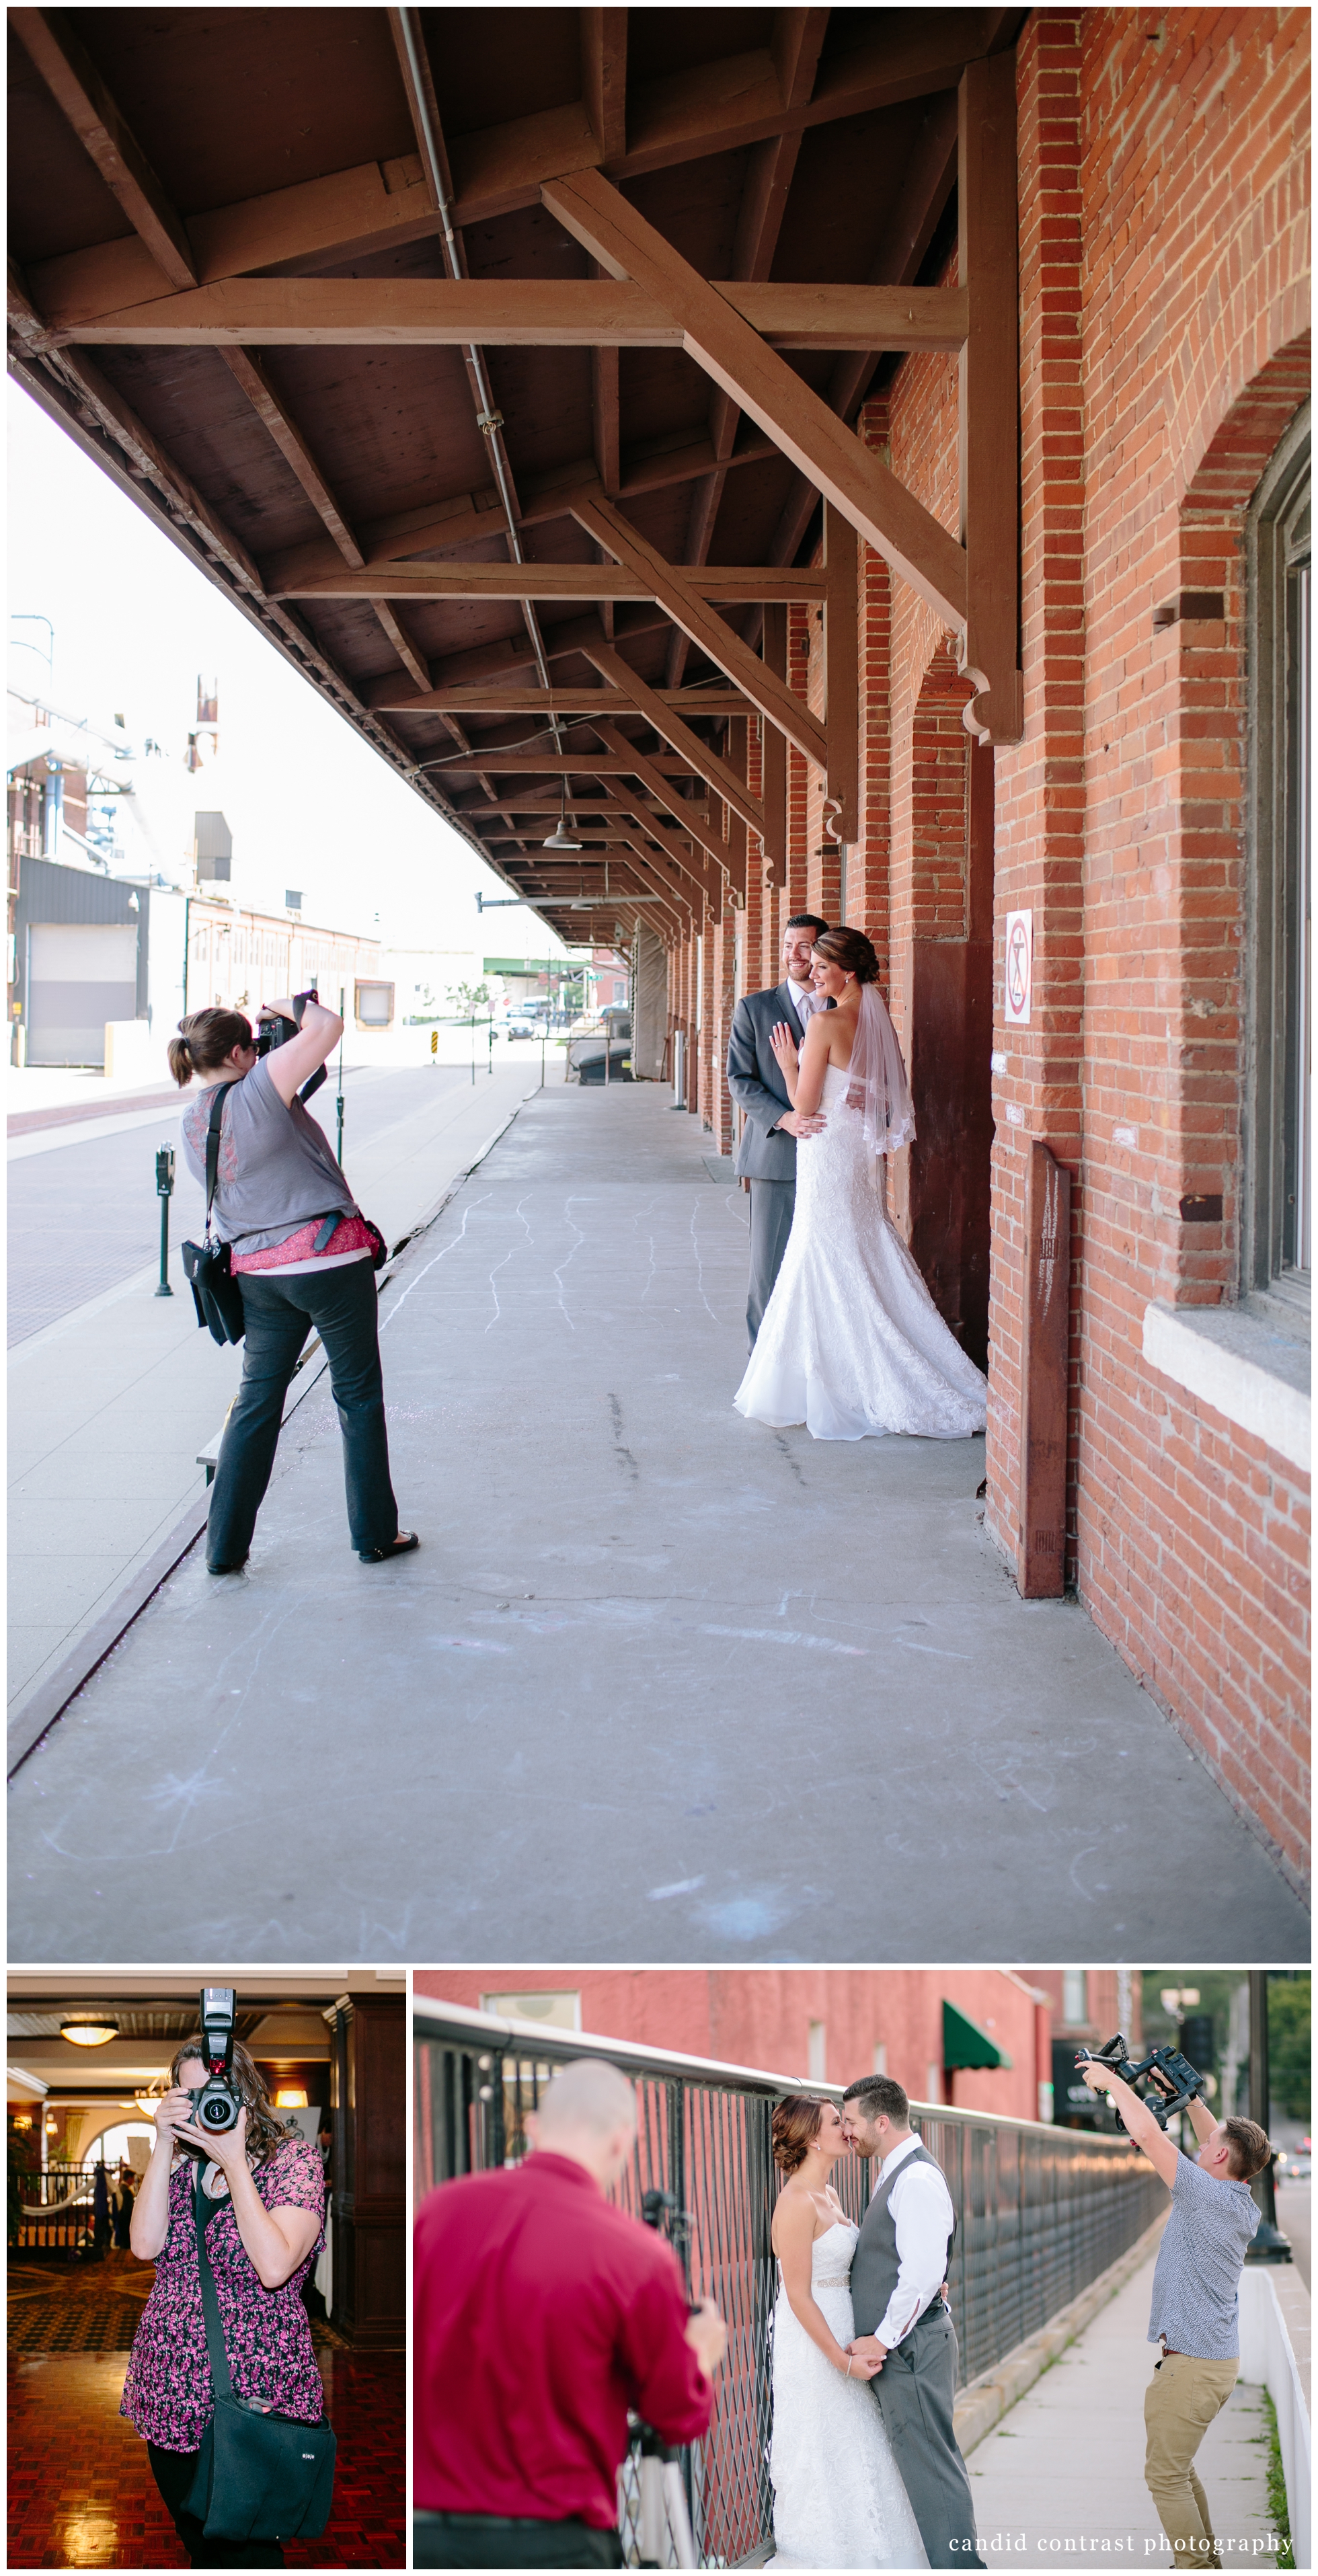 behind the scenes dubuque ia wedding photographer, candid contrast photography, uv films